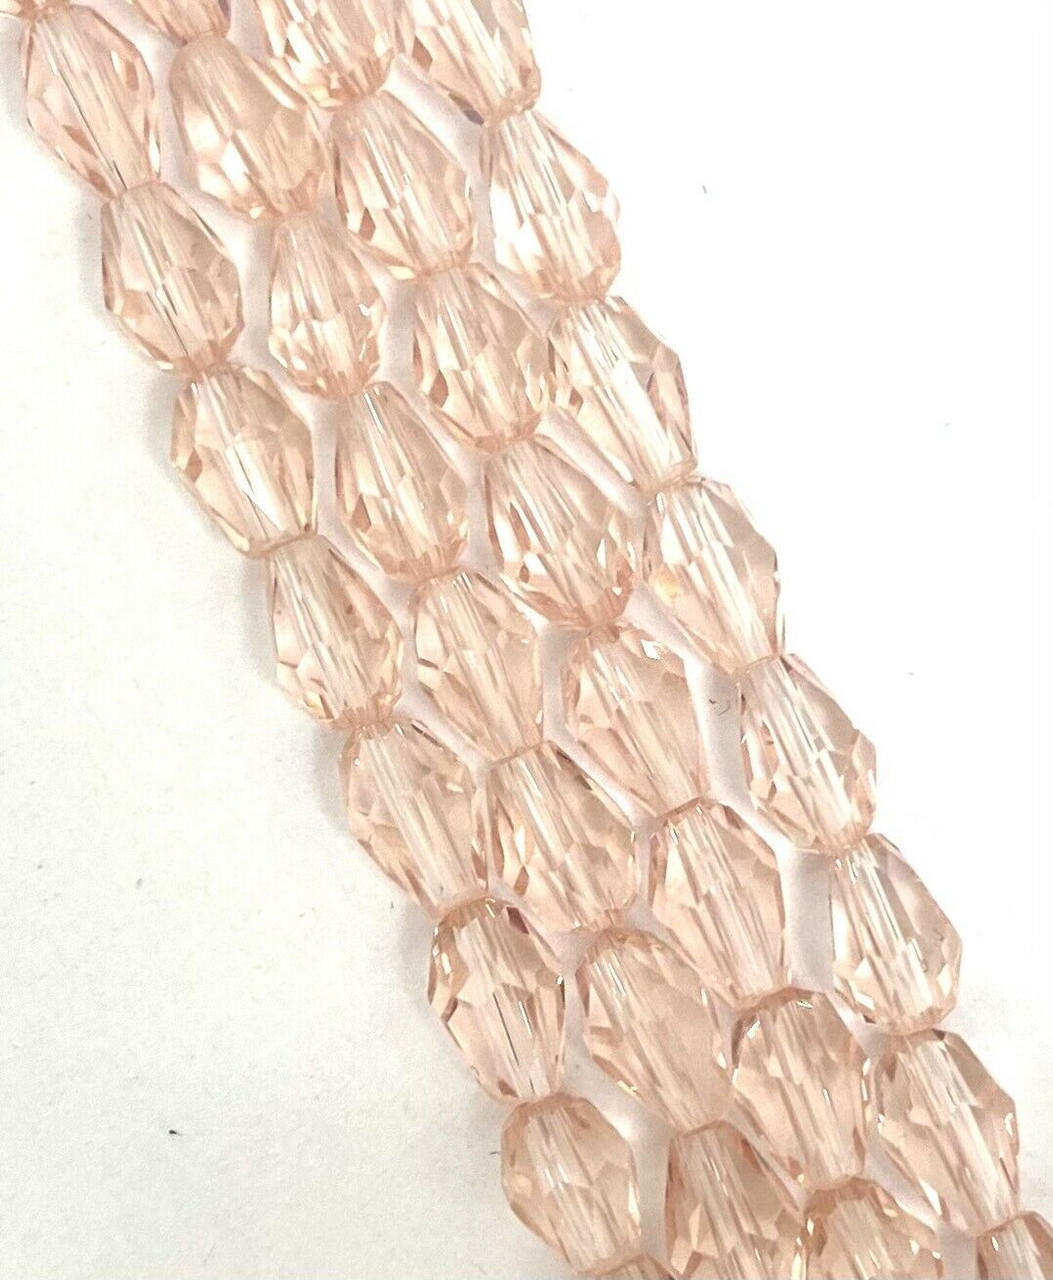 Strand of faceted drop glass beads (briolettes) - approx 6x4mm, Pale Pink, approx 72 beads